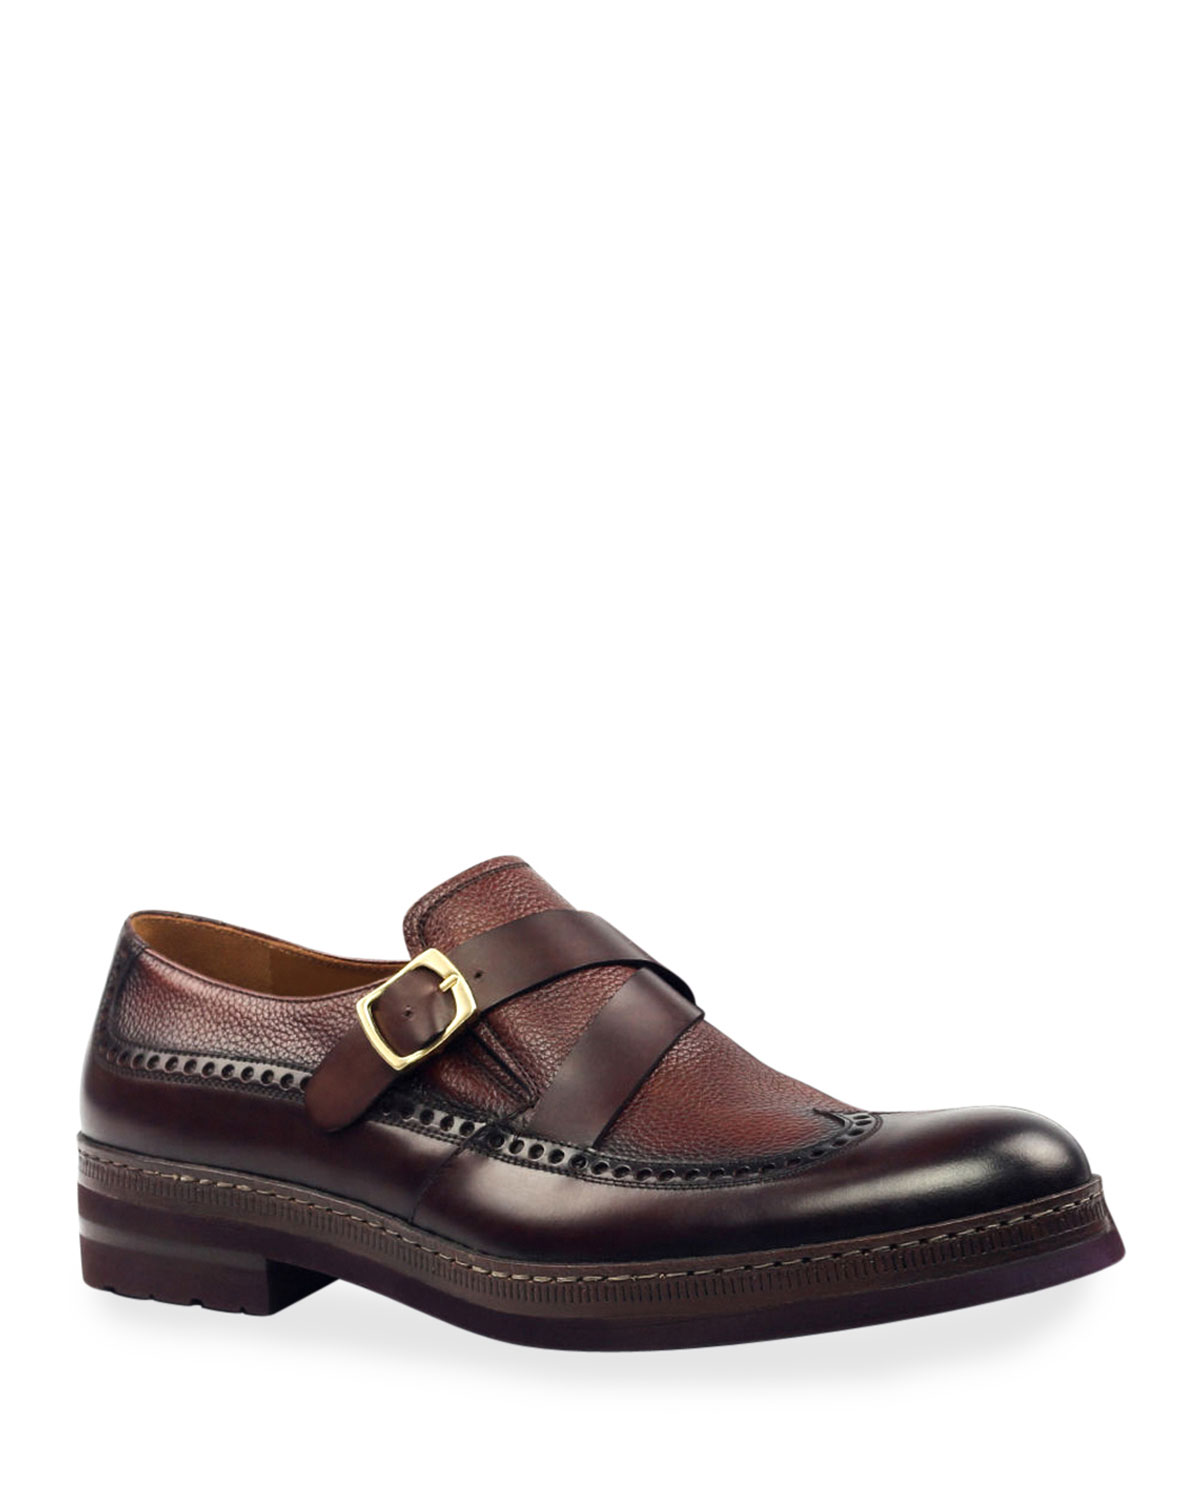 Ike Behar Men's Fusion Wing-tip Leather Loafers W/ Buckle Strap In Burgundy